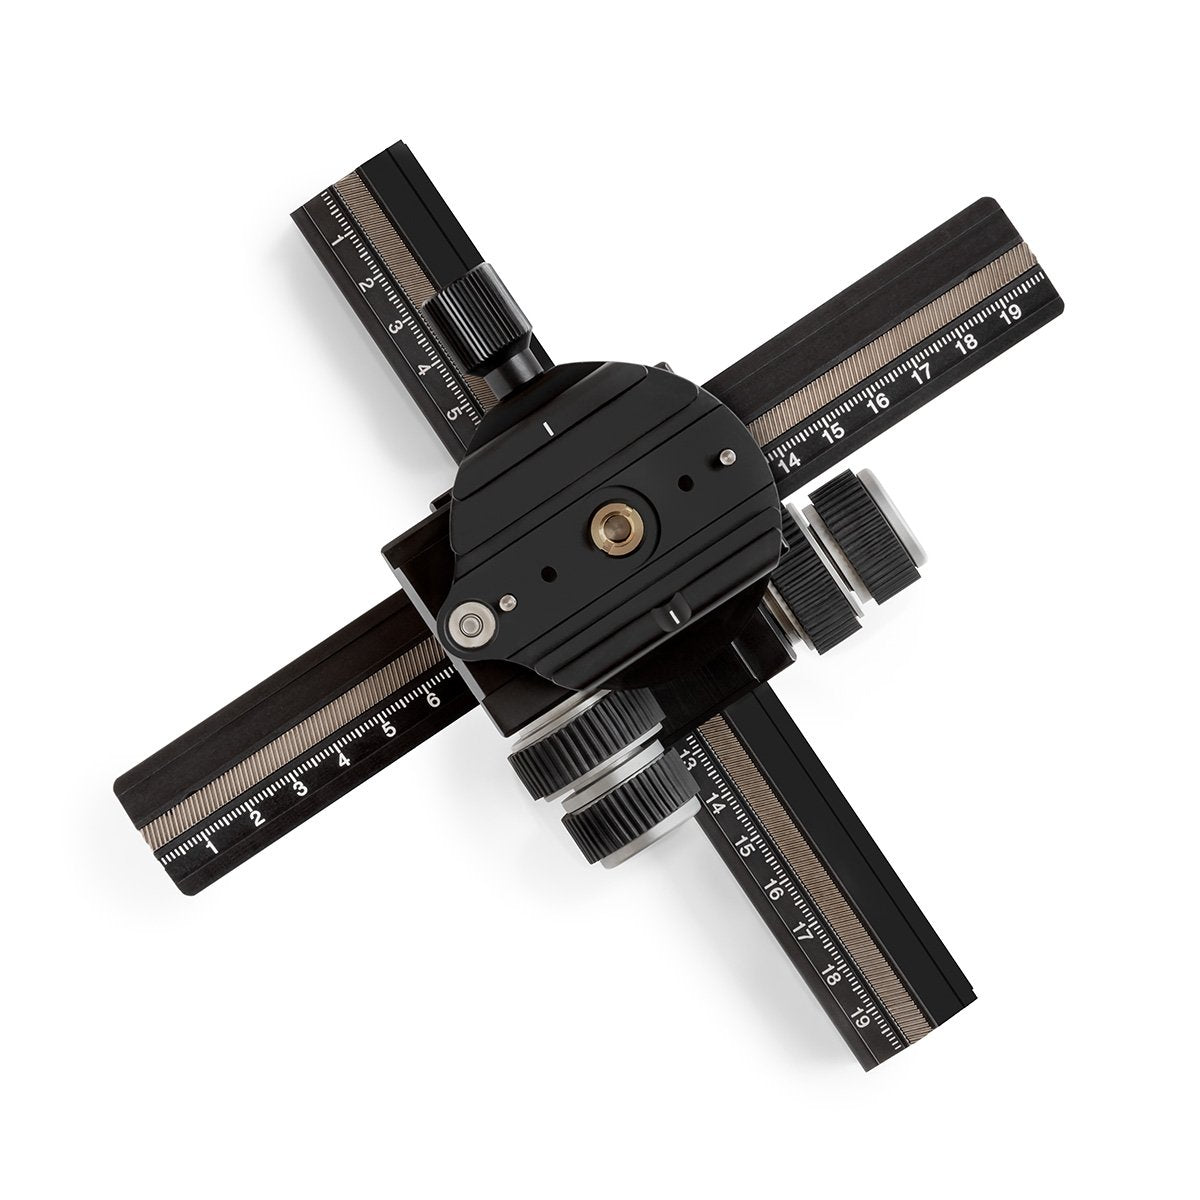 Arca-Swiss X-Table geared macro and positioning tripod head accessory, overhead view